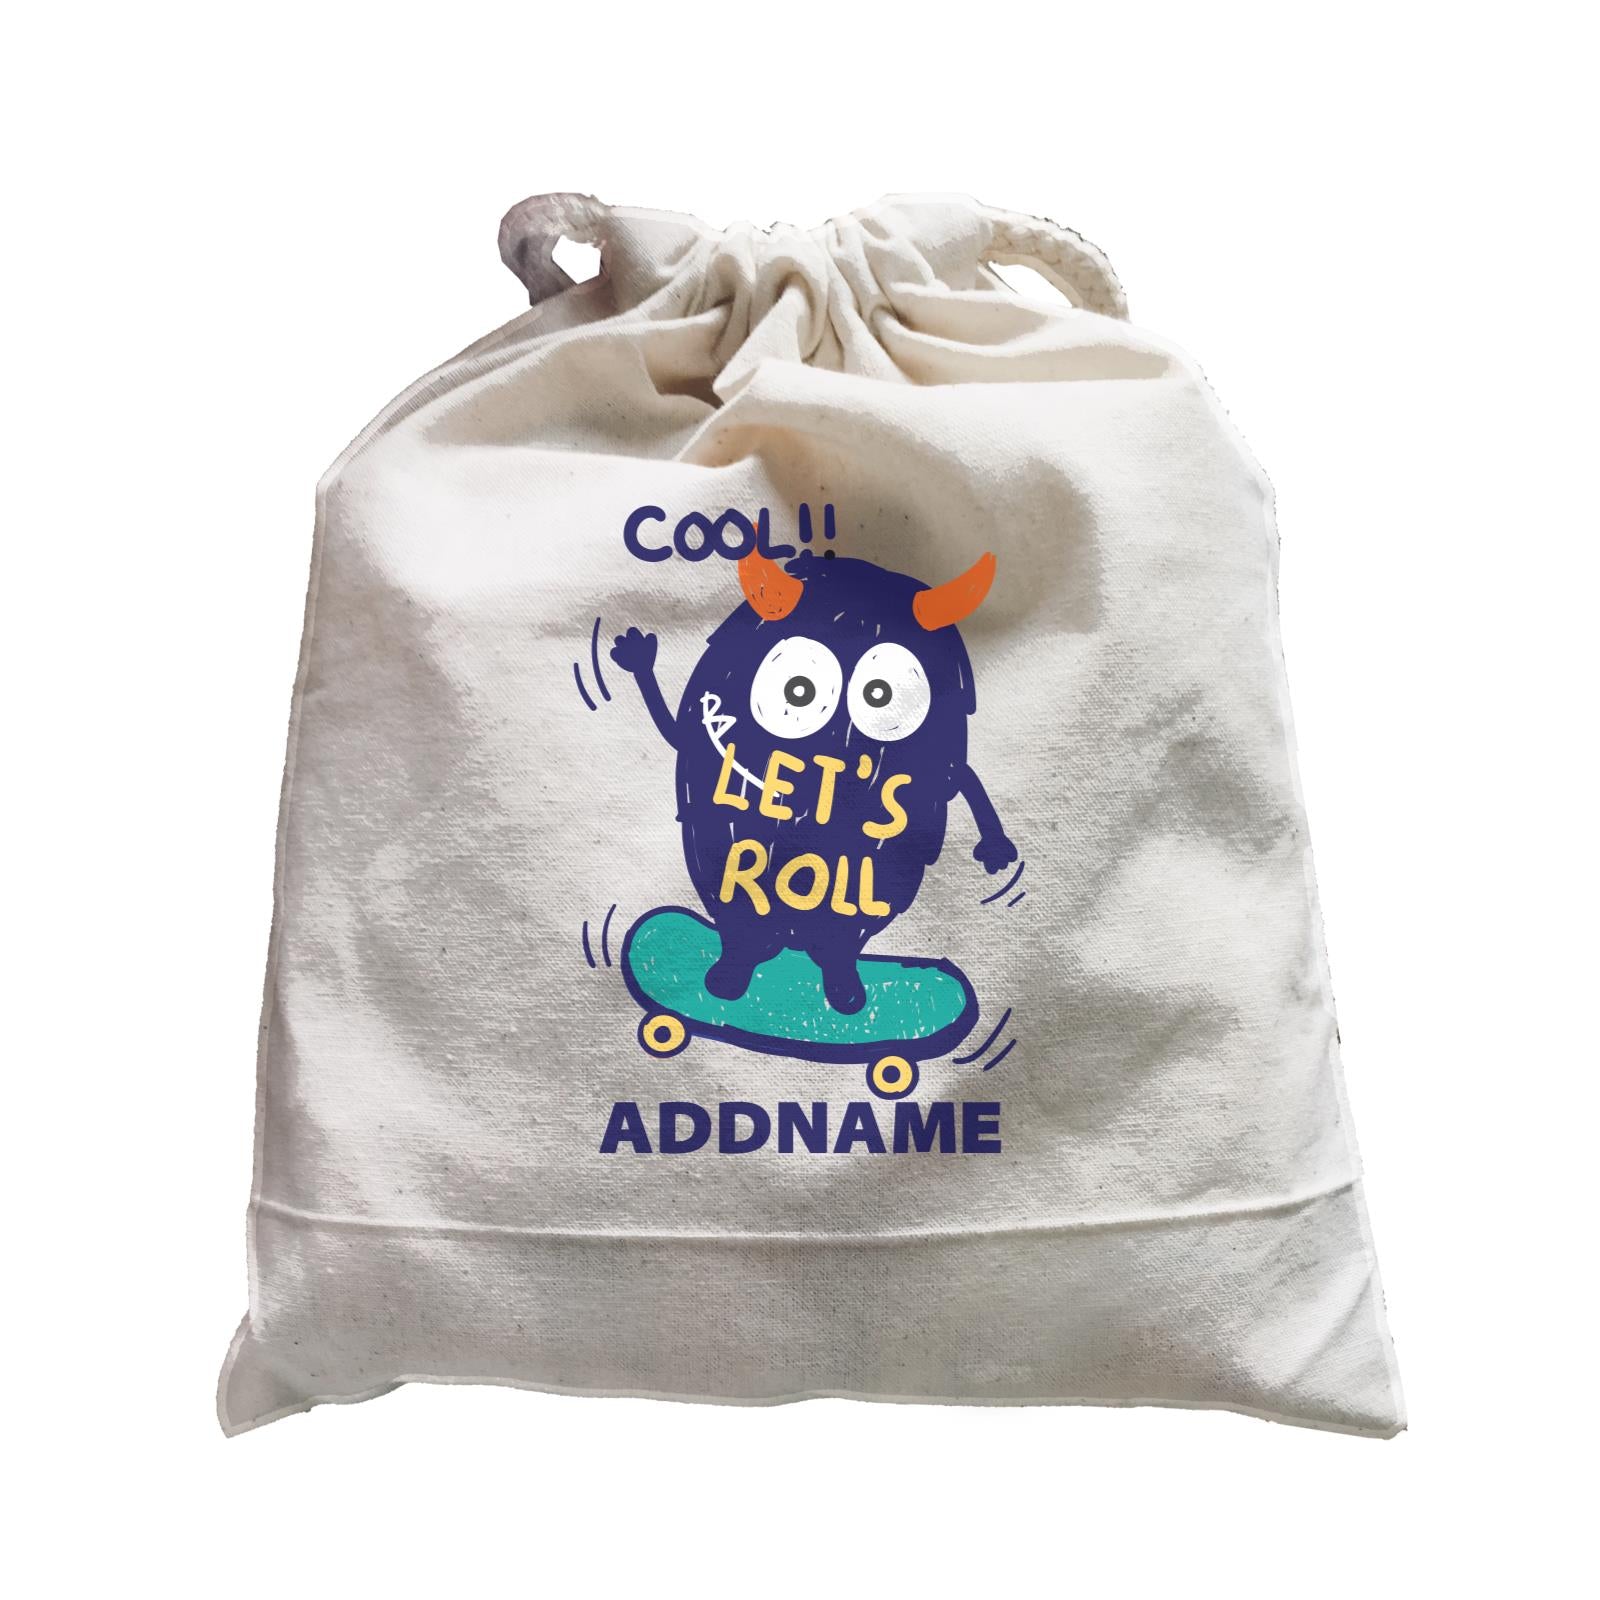 Cool Cute Monster Cool Let's Roll Monster Addname Satchel